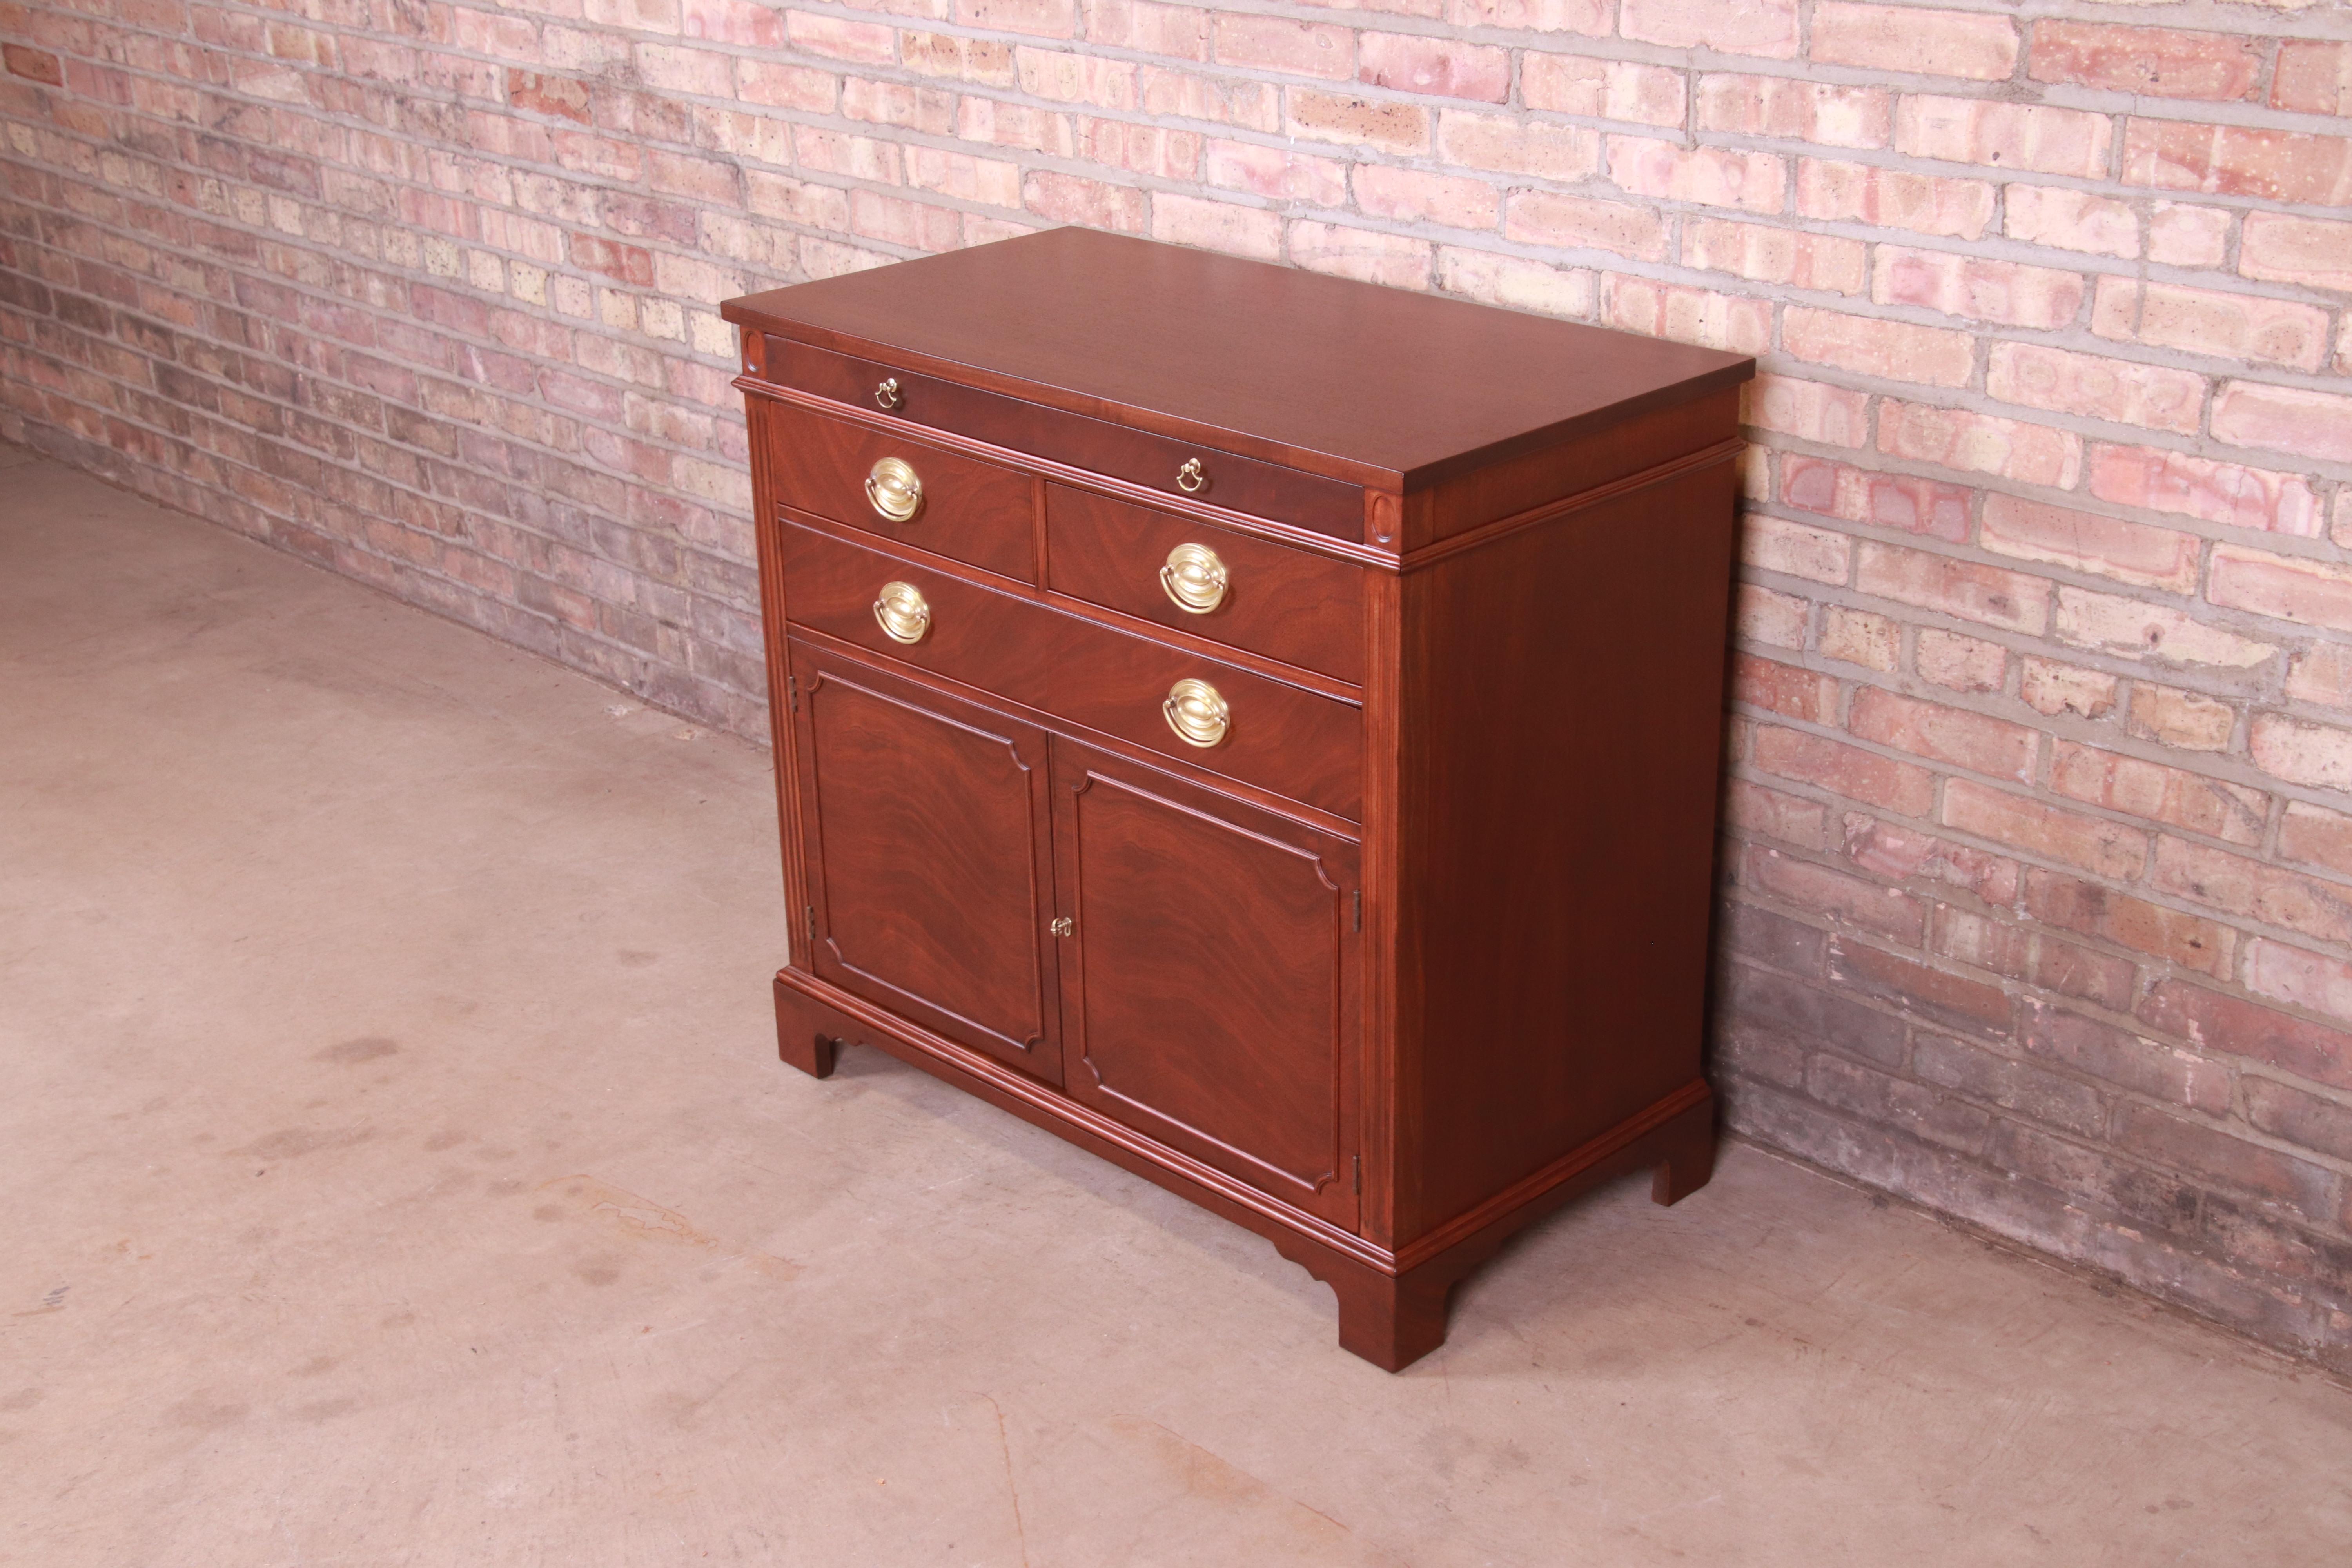 An exceptional mid-century Georgian style compact credenza, sideboard buffet, or bar cabinet

By Drexel Furniture, 